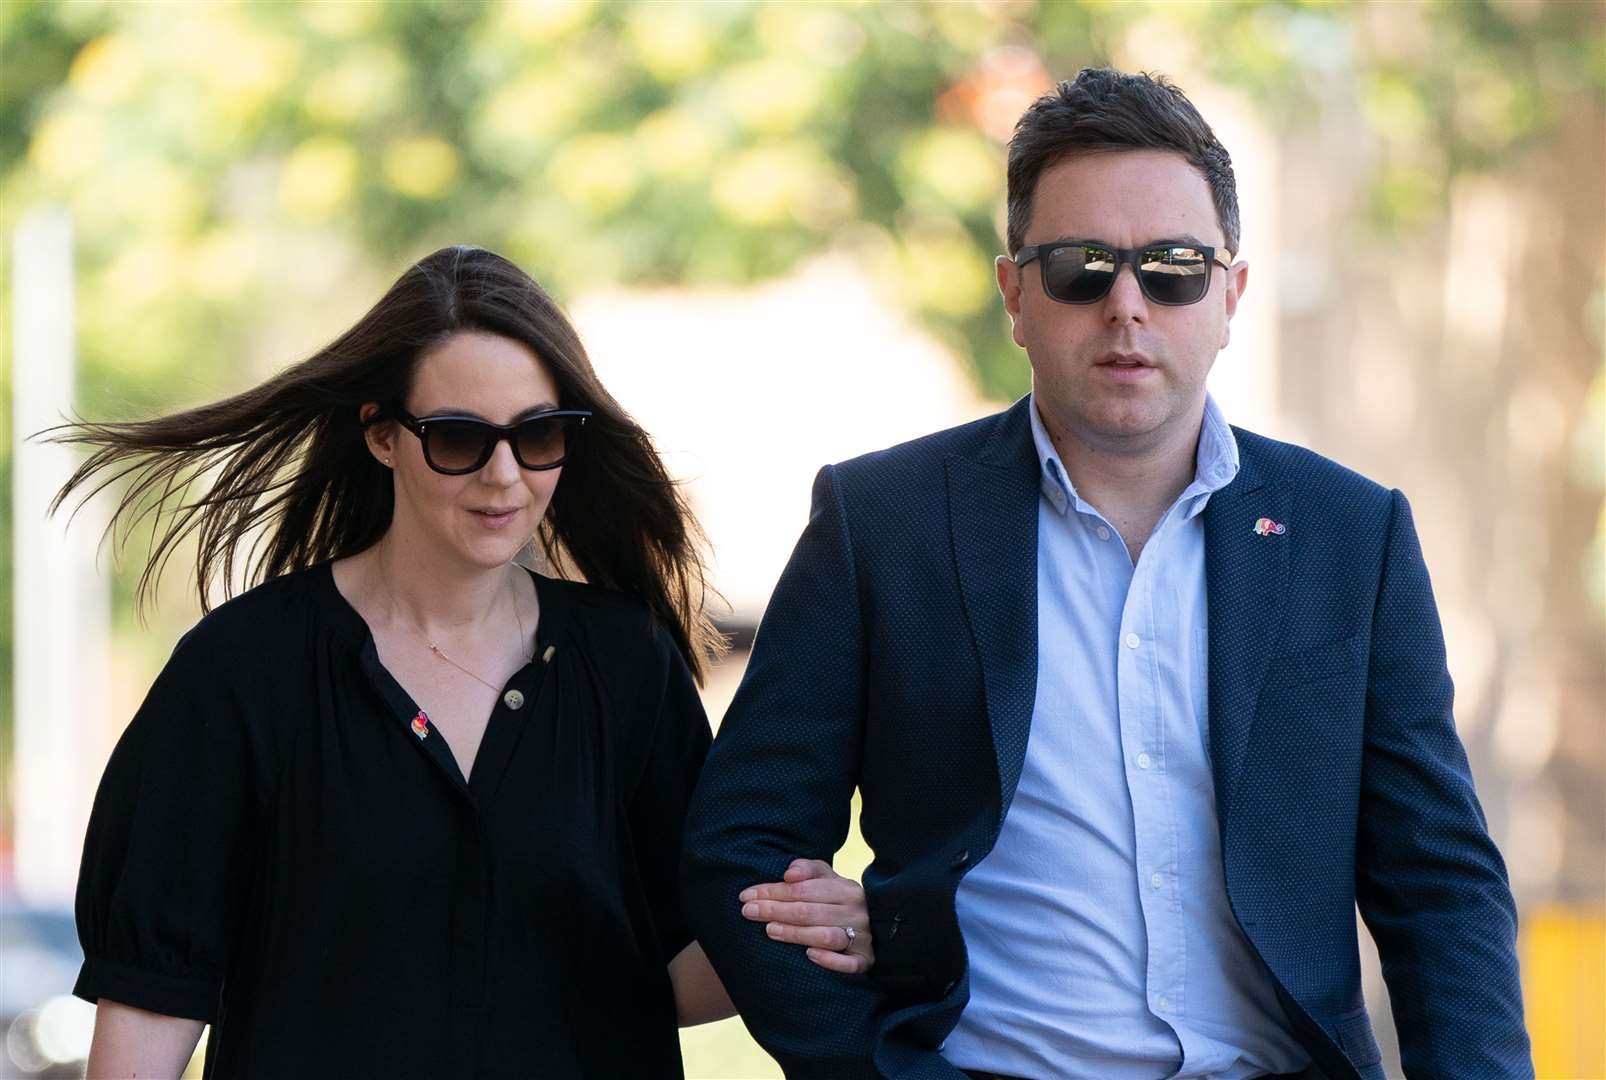 Chris and Rachael Thorold, parents of baby Louis, arrive at Cambridge Crown Court (Joe Giddens/PA)